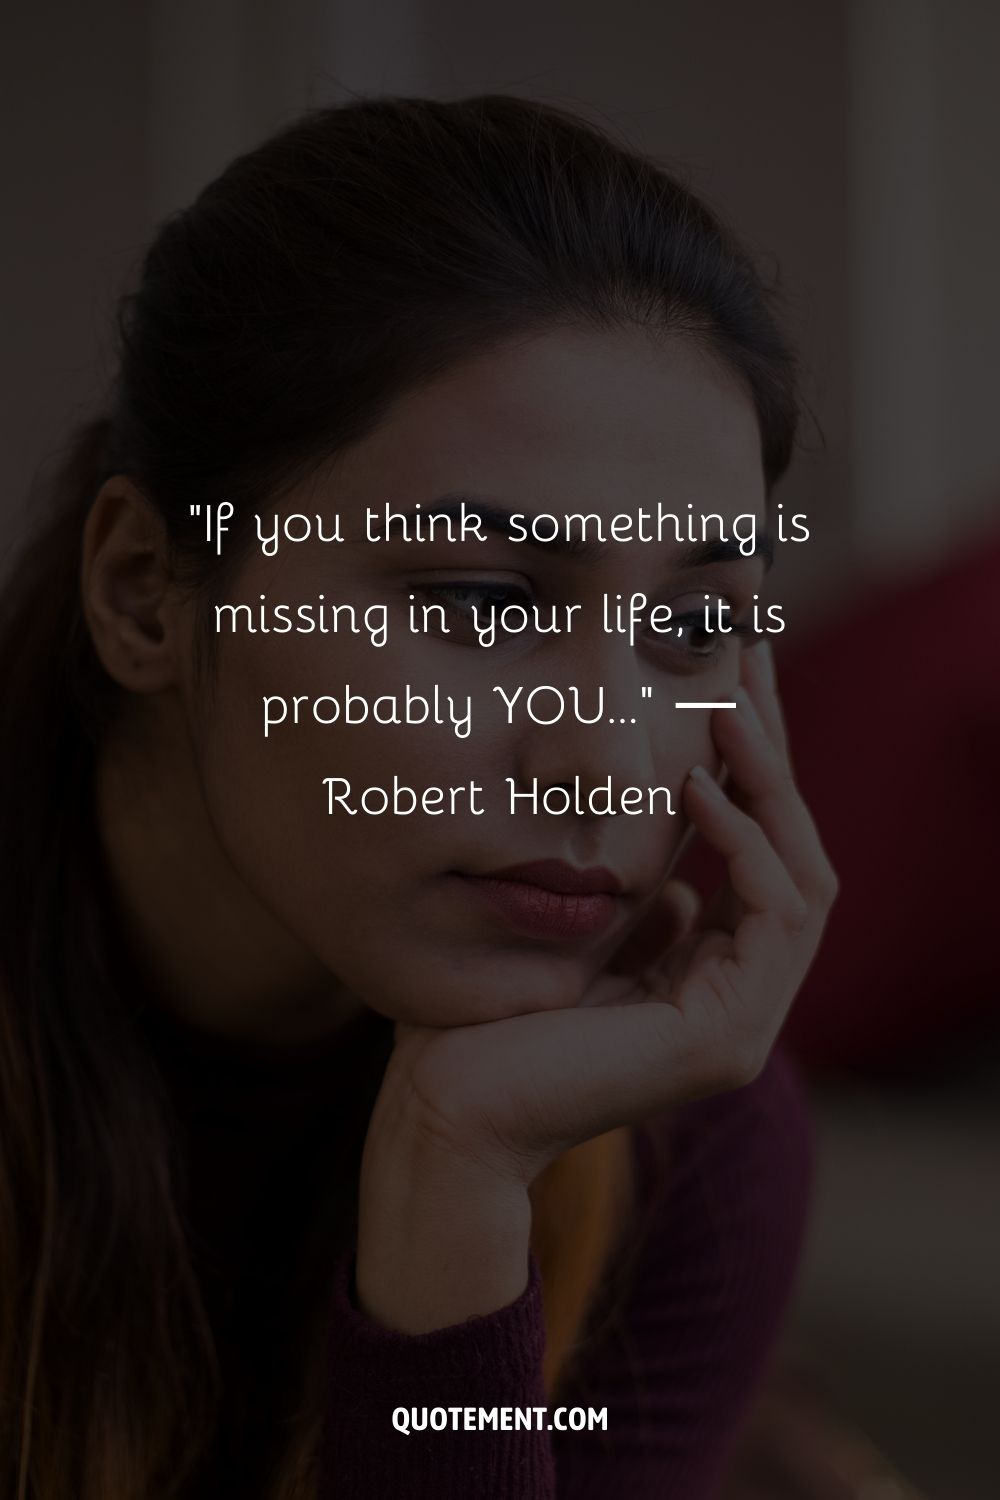 If you think something is missing in your life, it is probably YOU..